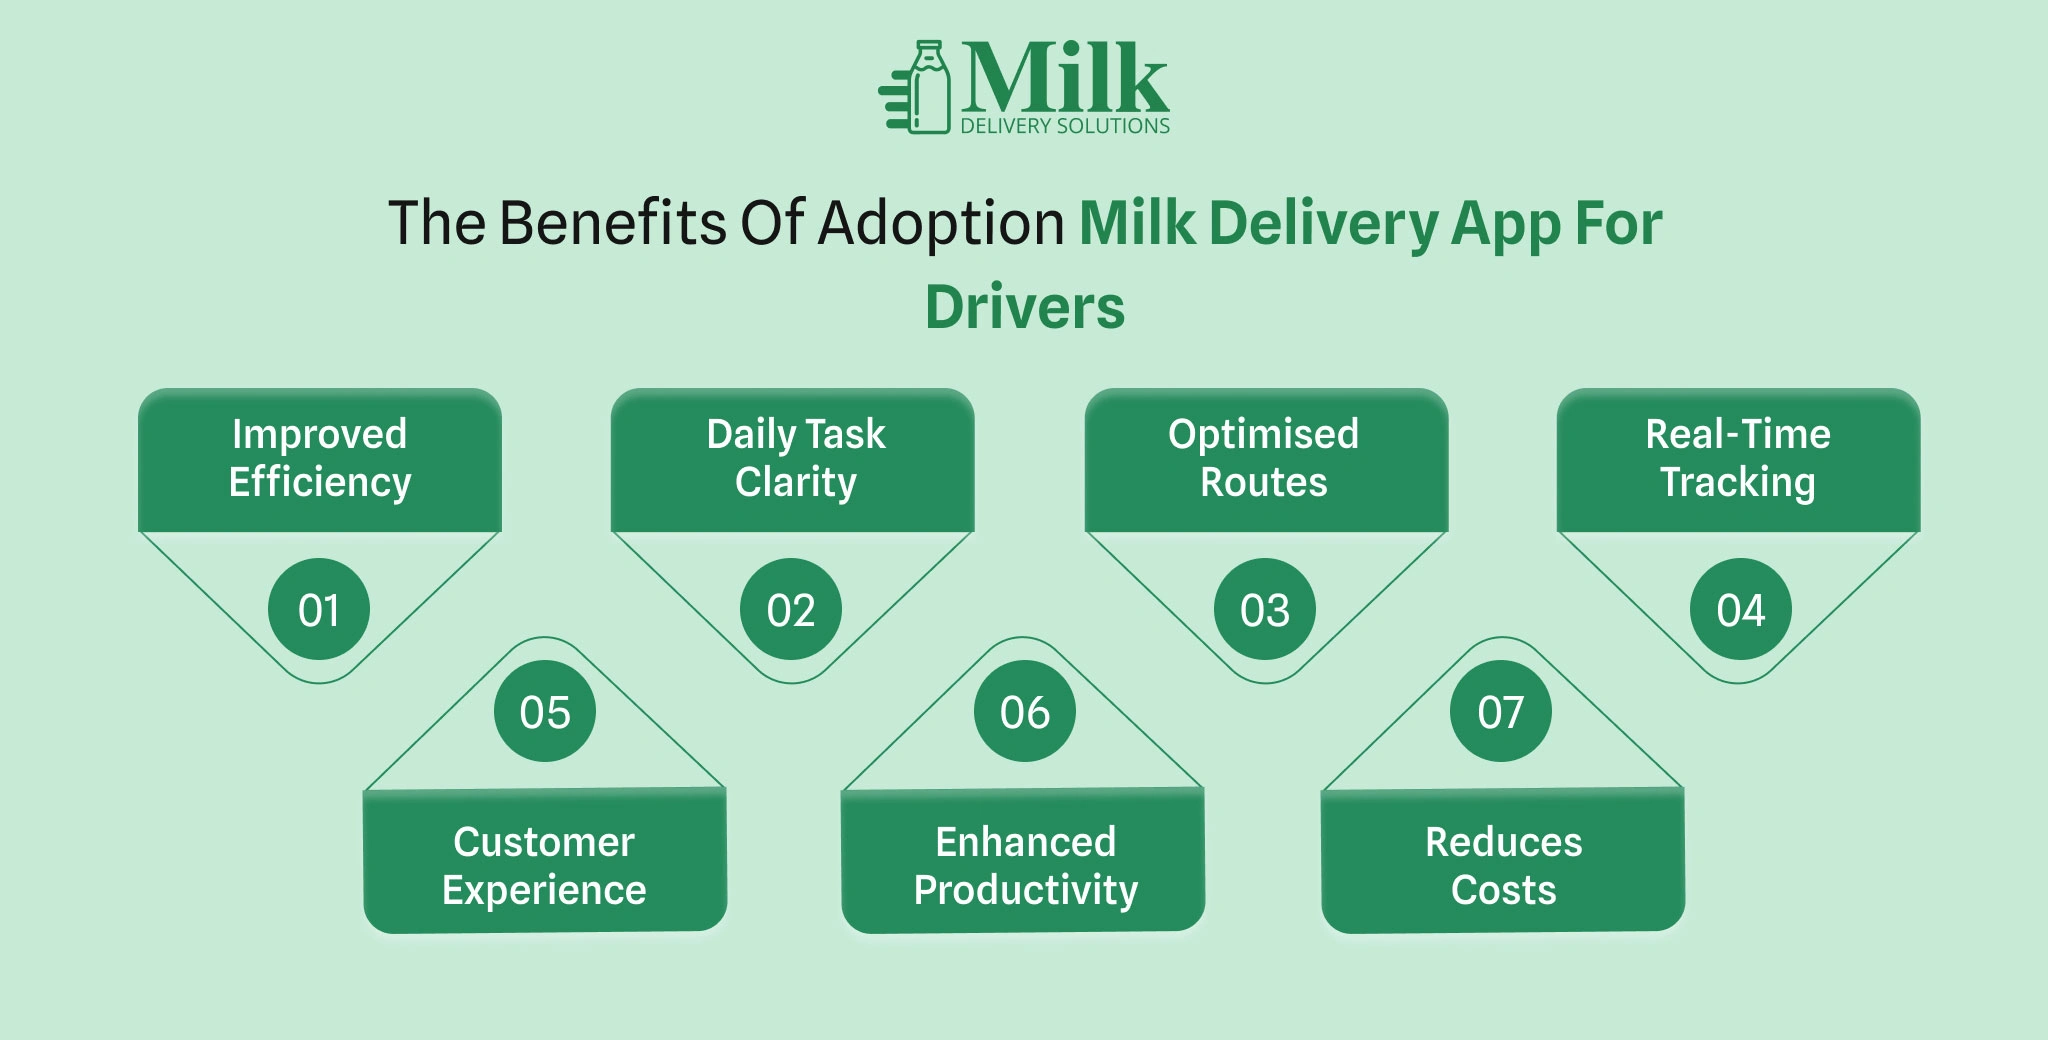 ravi garg, mds, benefits, milk delivery app, milk delivery app for drivers, efficiency, task clarity, optimised routes, real-time tracking, customer experience, productivity, reduced costs